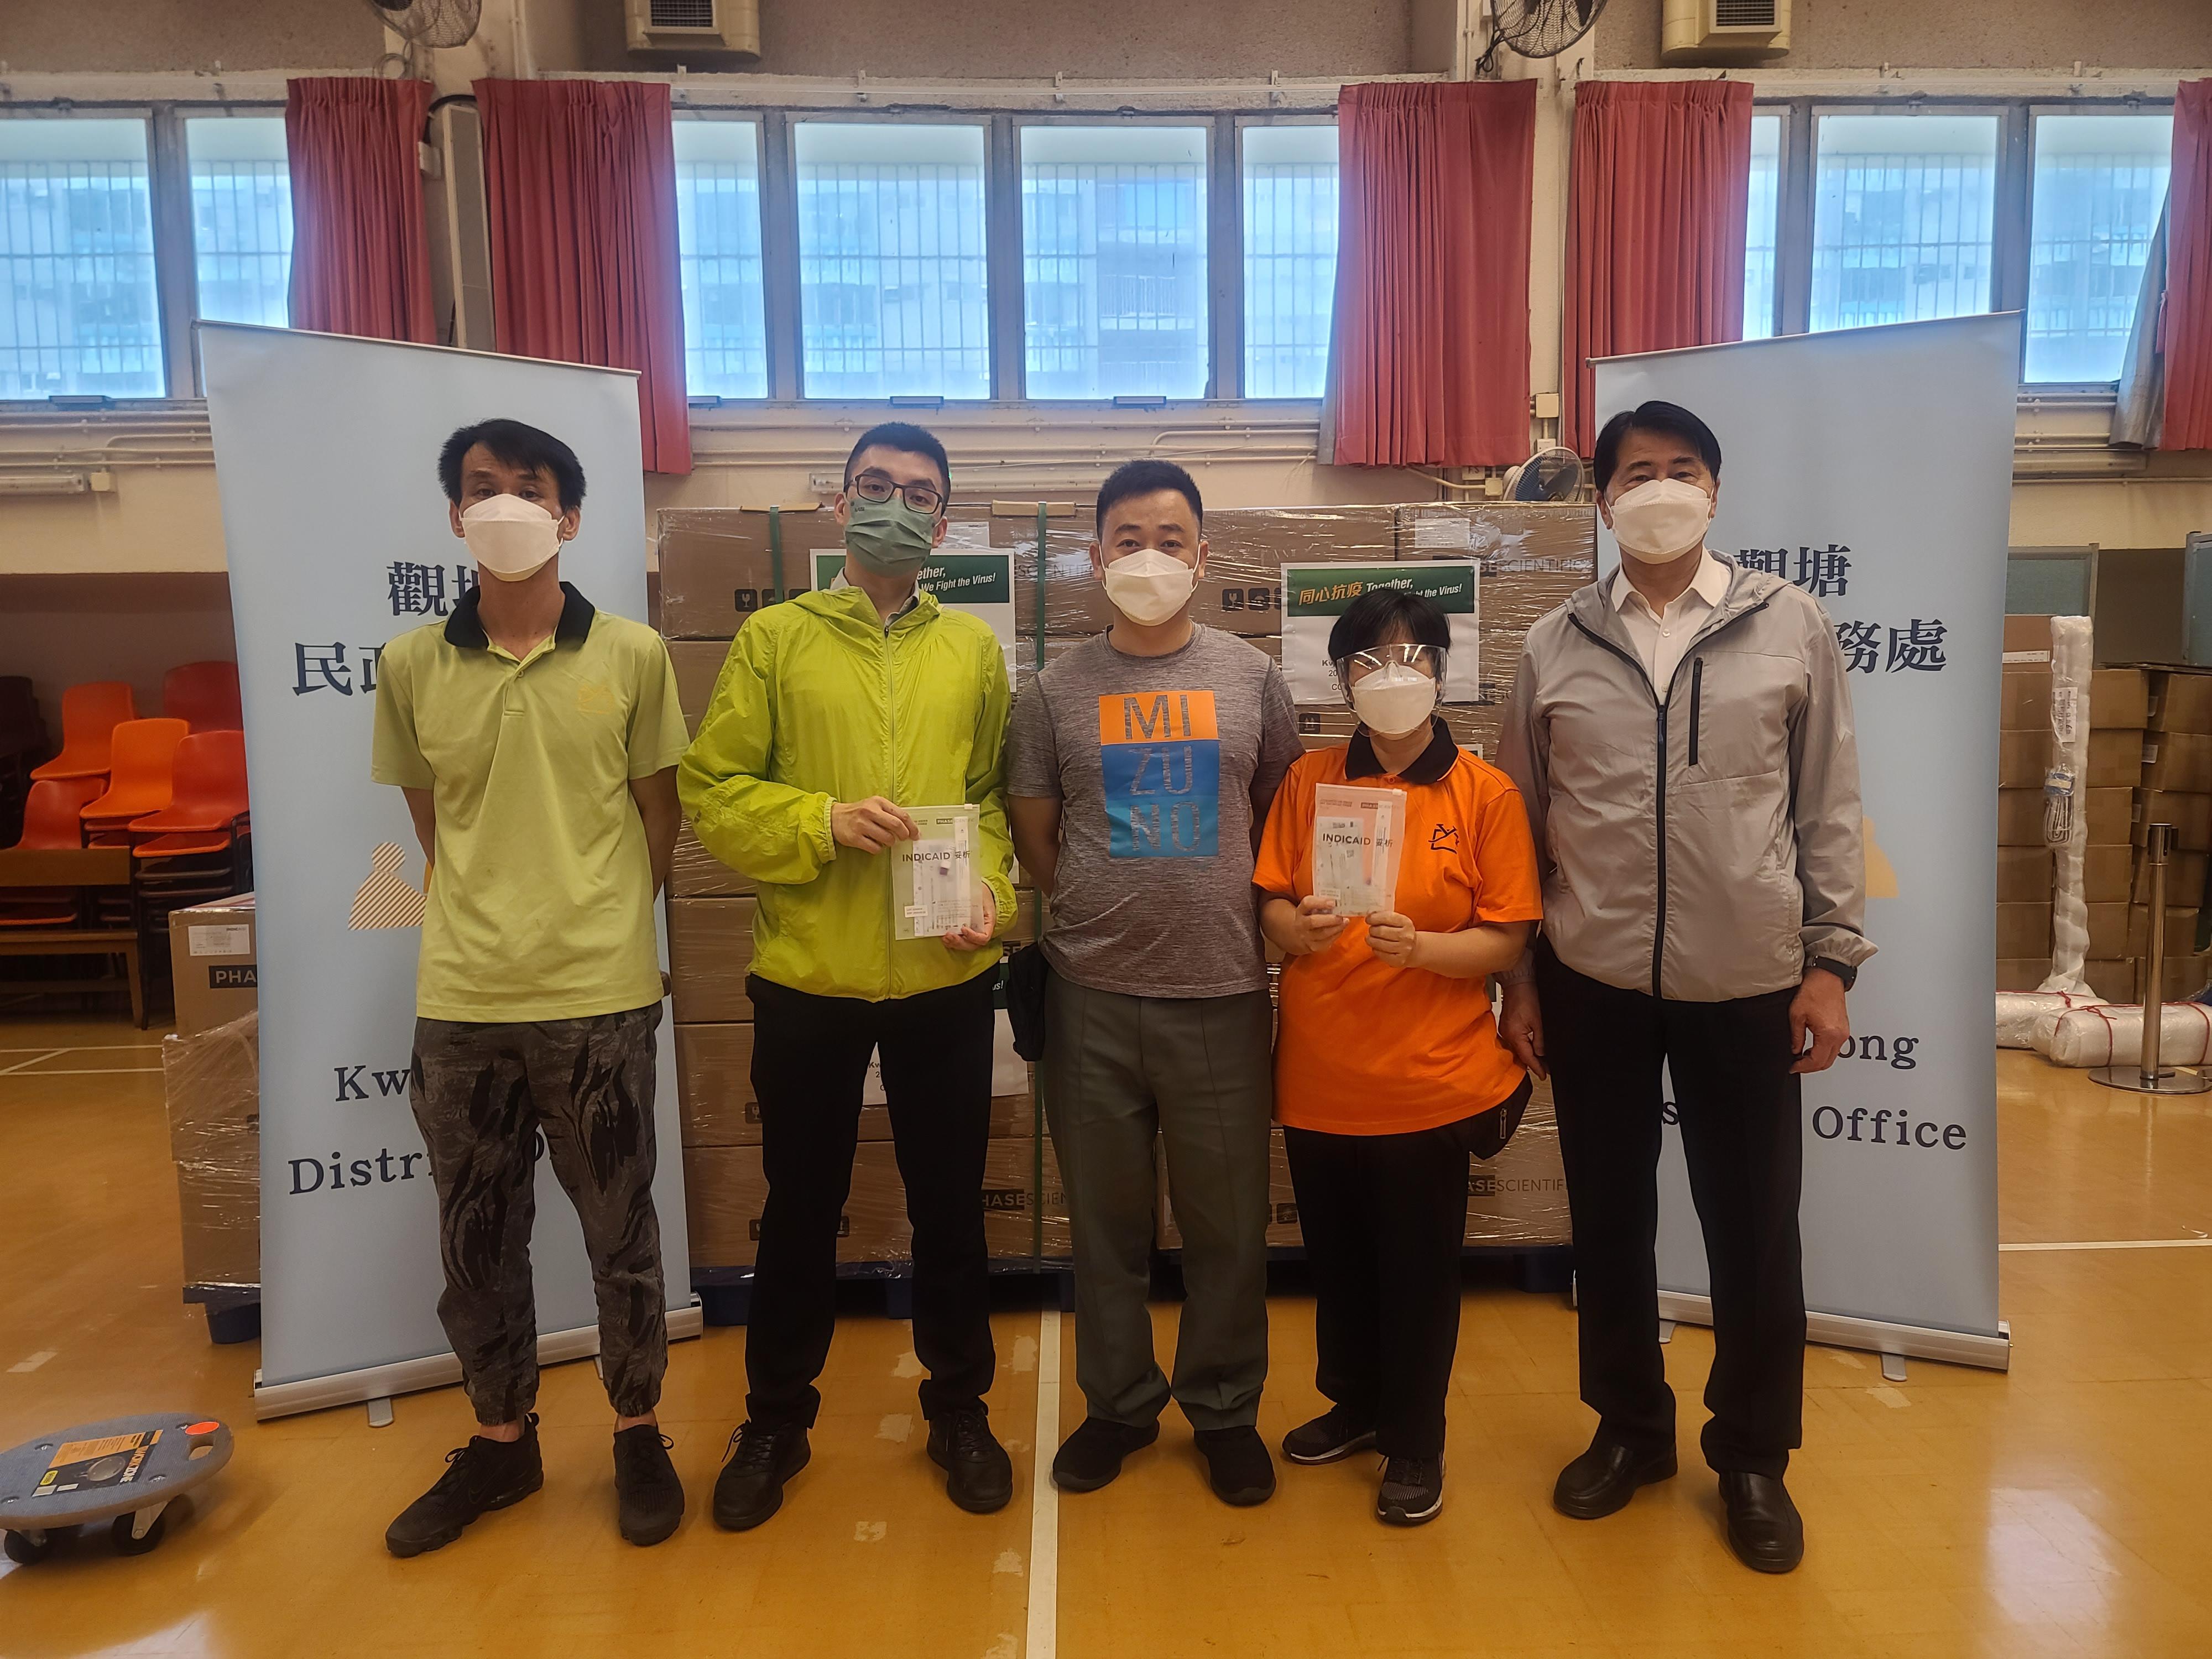 The Kwun Tong District Office today (March 22) distributed COVID-19 rapid test kits to households, cleansing workers and property management staff living and working in Tak Bo Garden for voluntary testing through the property management company.